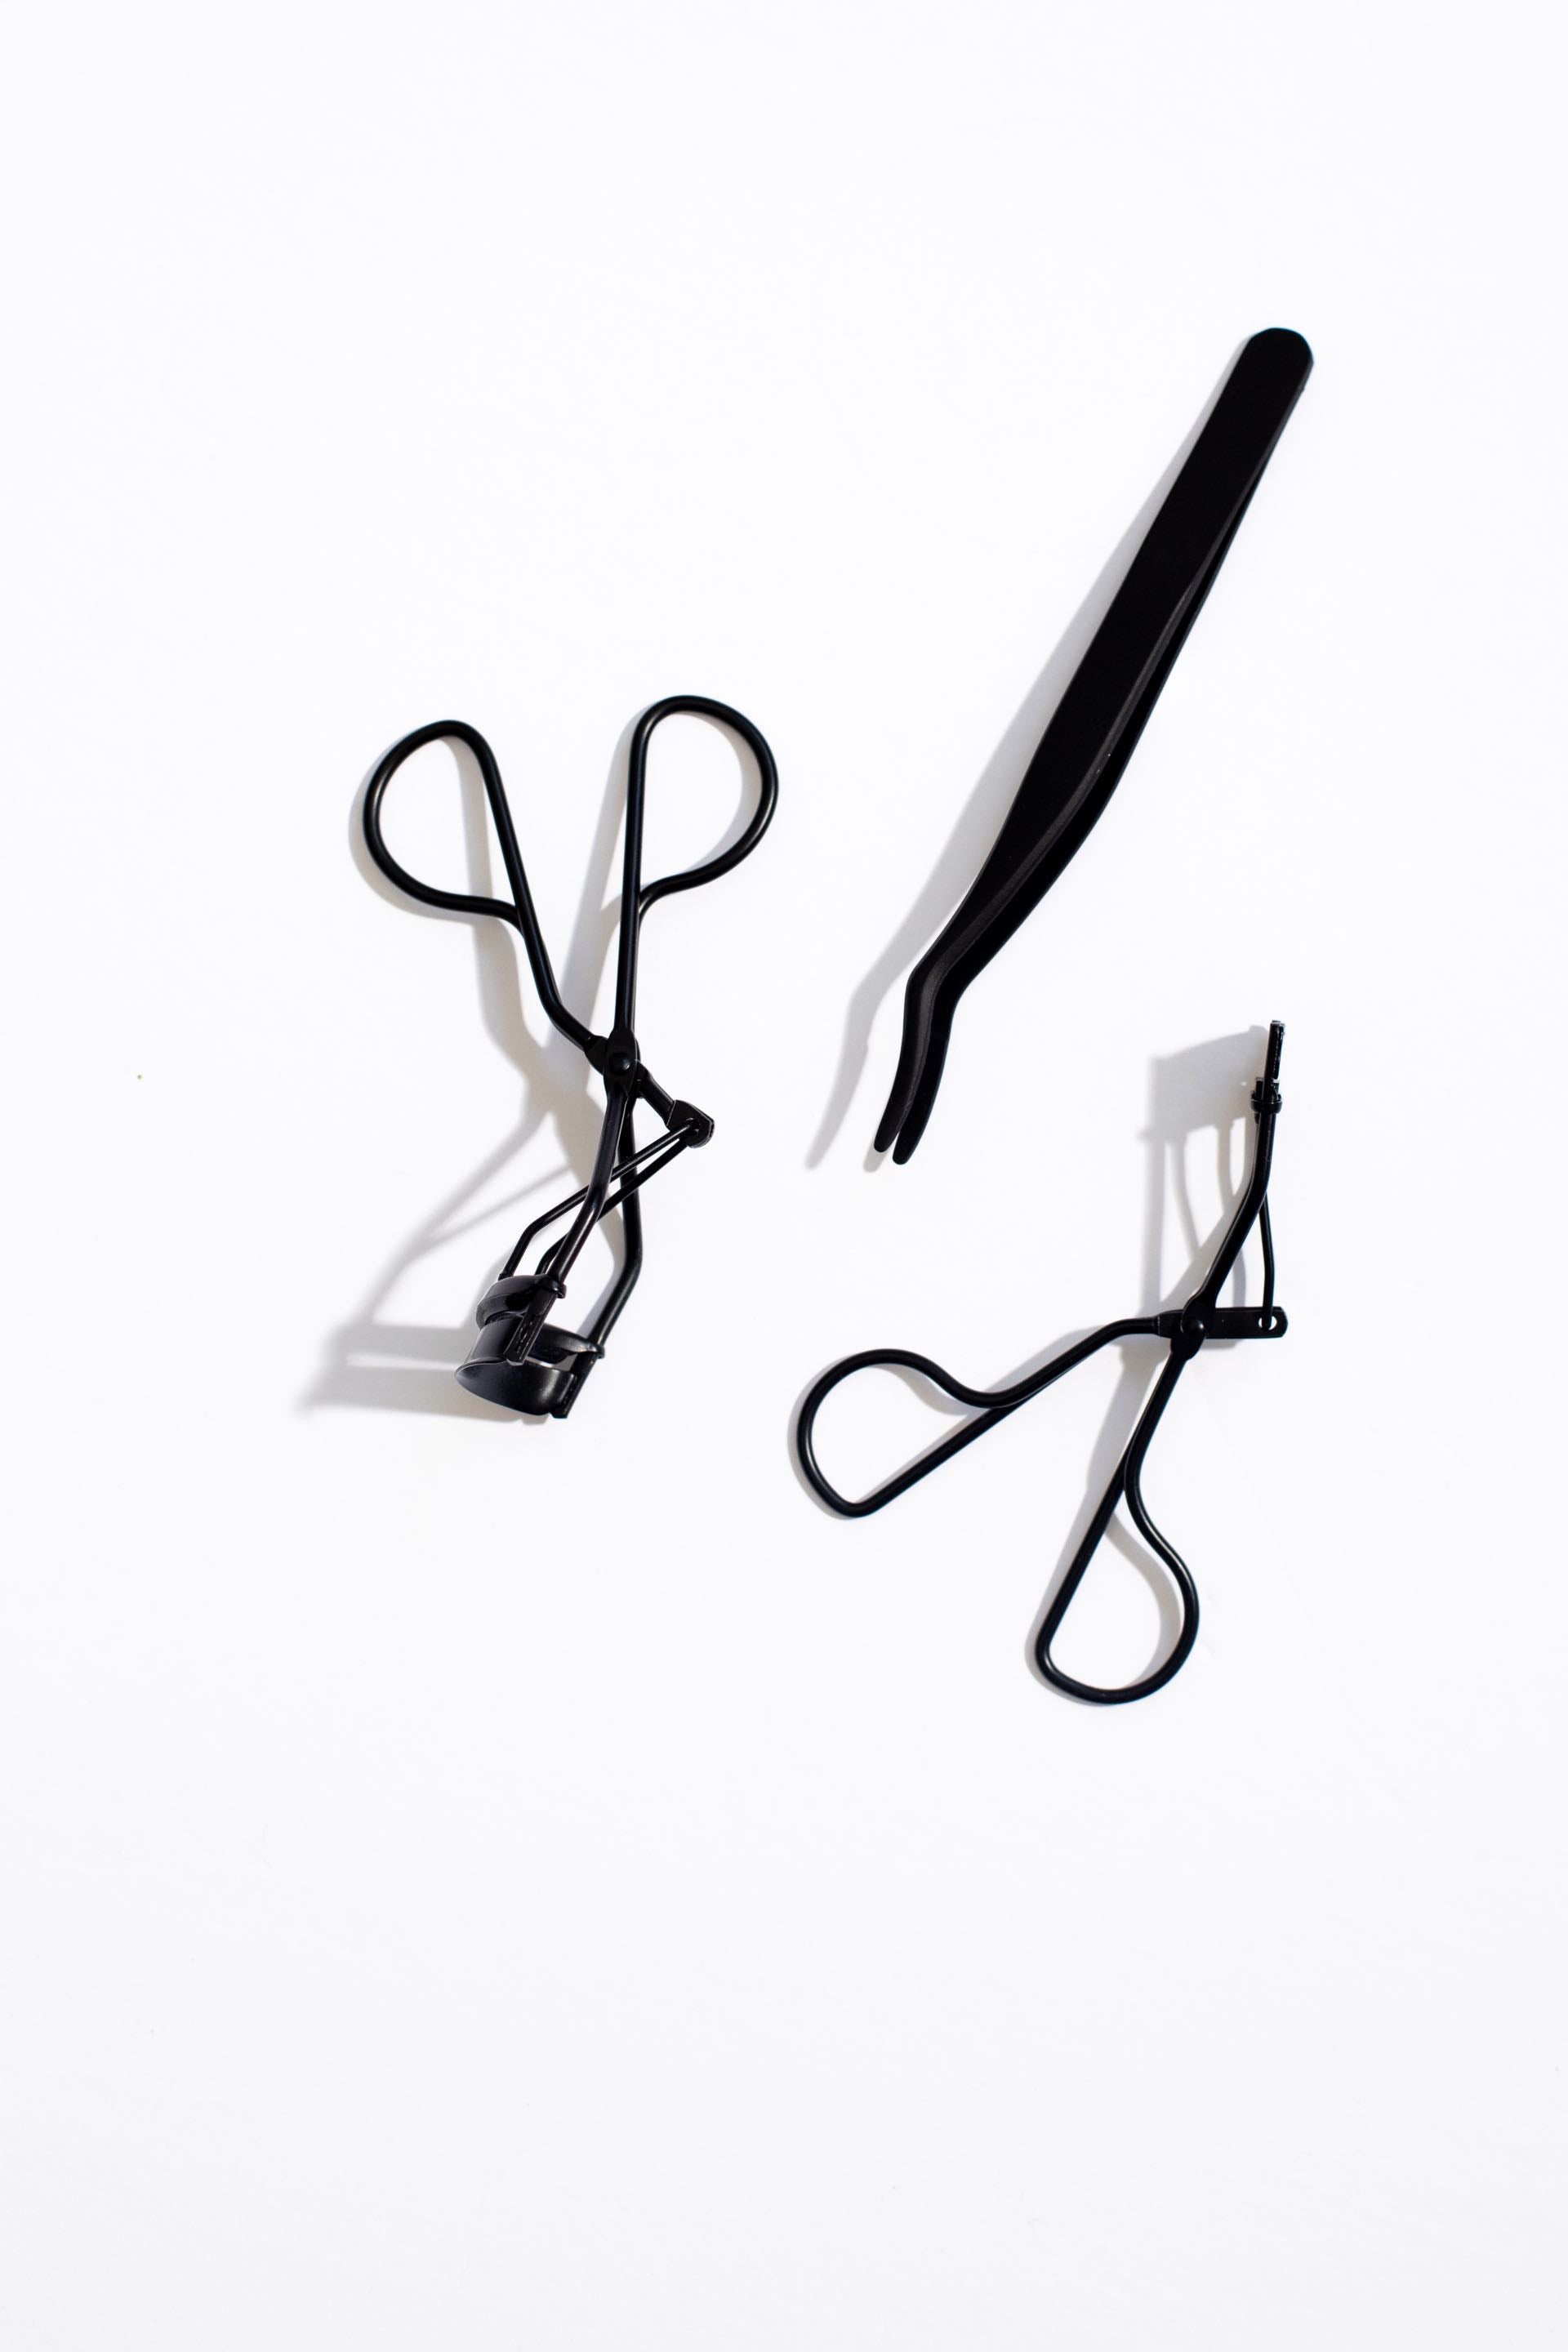 Blog_Check Out Lithe Lashes' New Tools, Accessories & Kits_second Image_Lash Applicator, Lash Curler, Mini Lash Curler_Tools, Accessories and Kits_Product Flat Lay